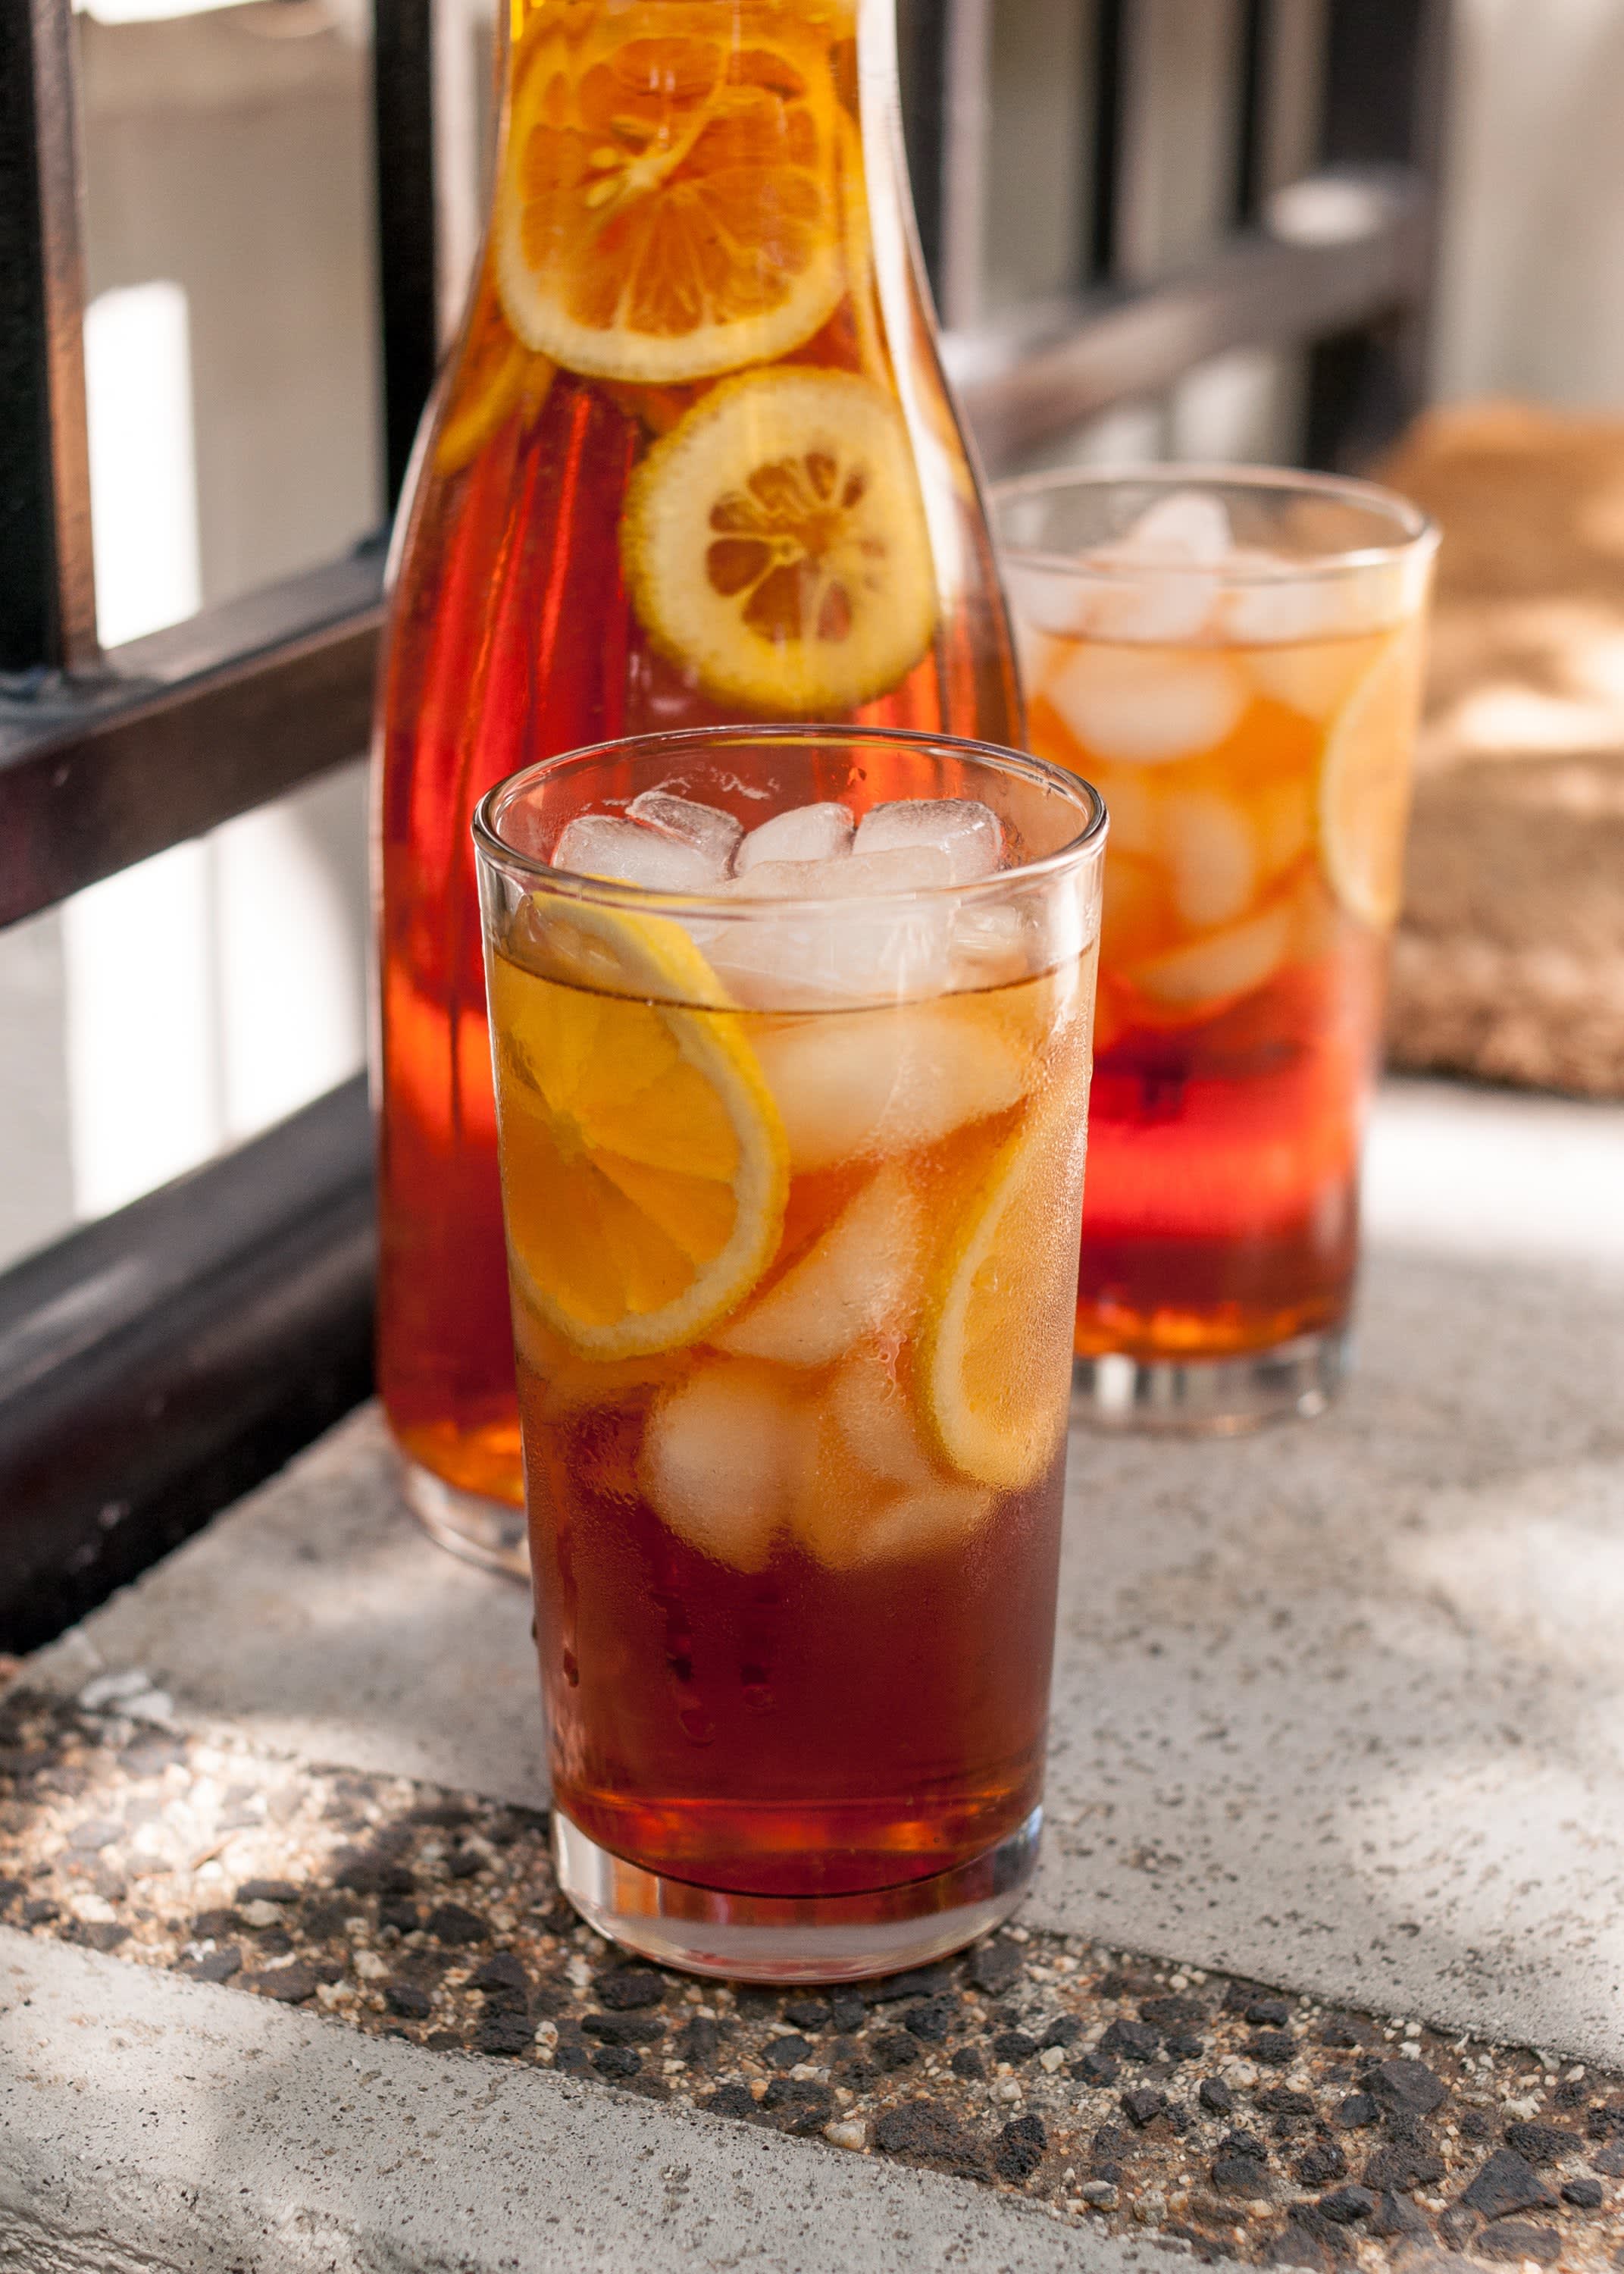 How to Make a Single Serving of Sweet Tea